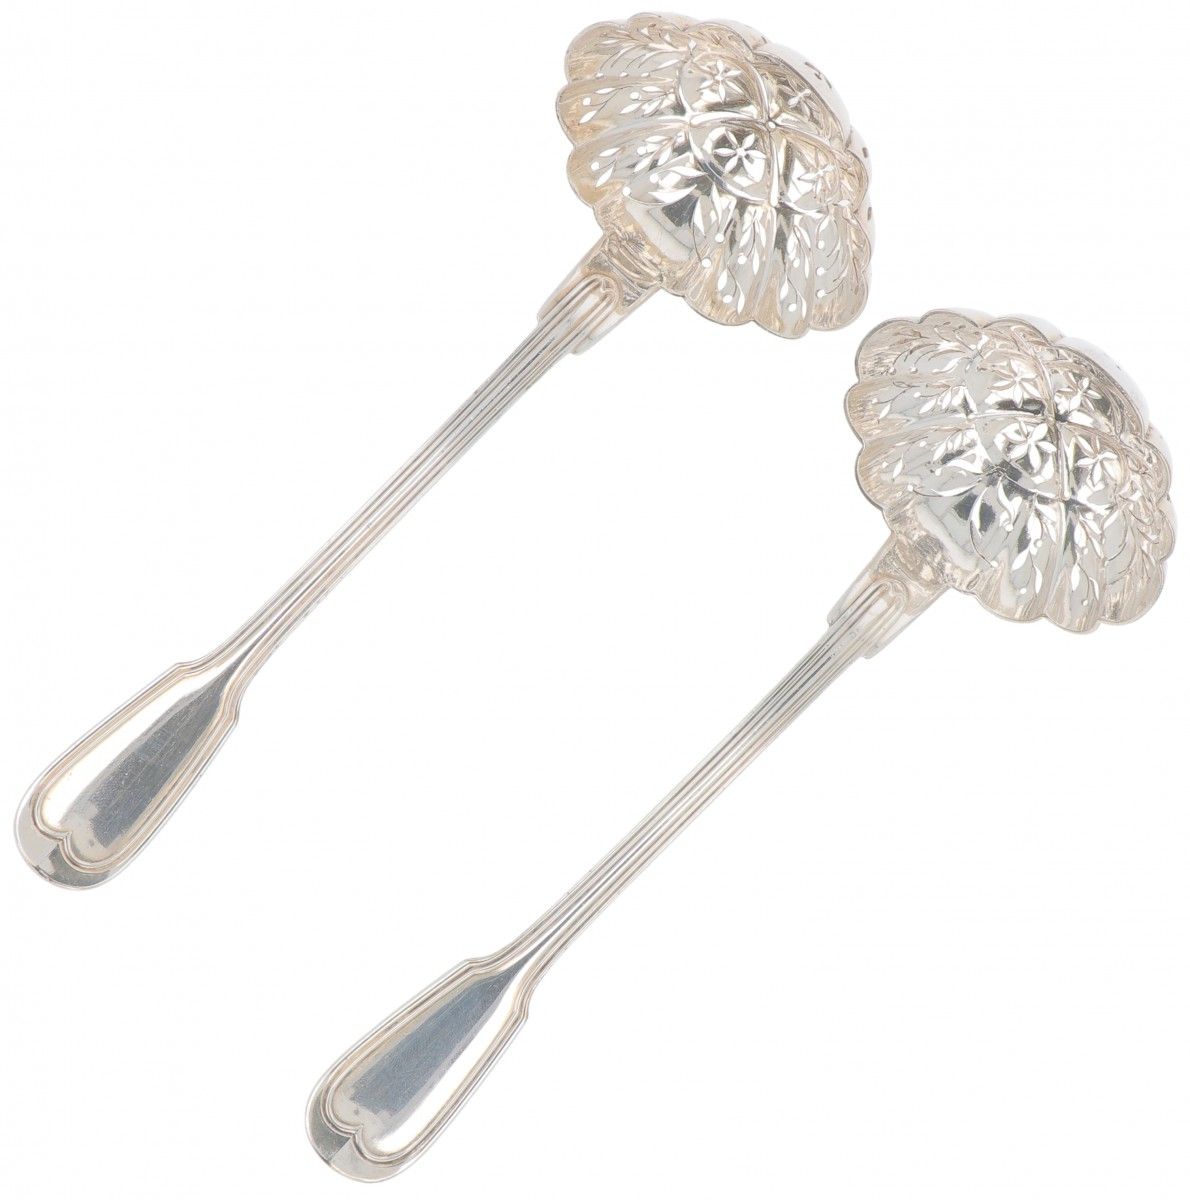 (2) piece set sprinkler spoons, Christofle "Chinon", silver-plated. Modelo "Chin&hellip;